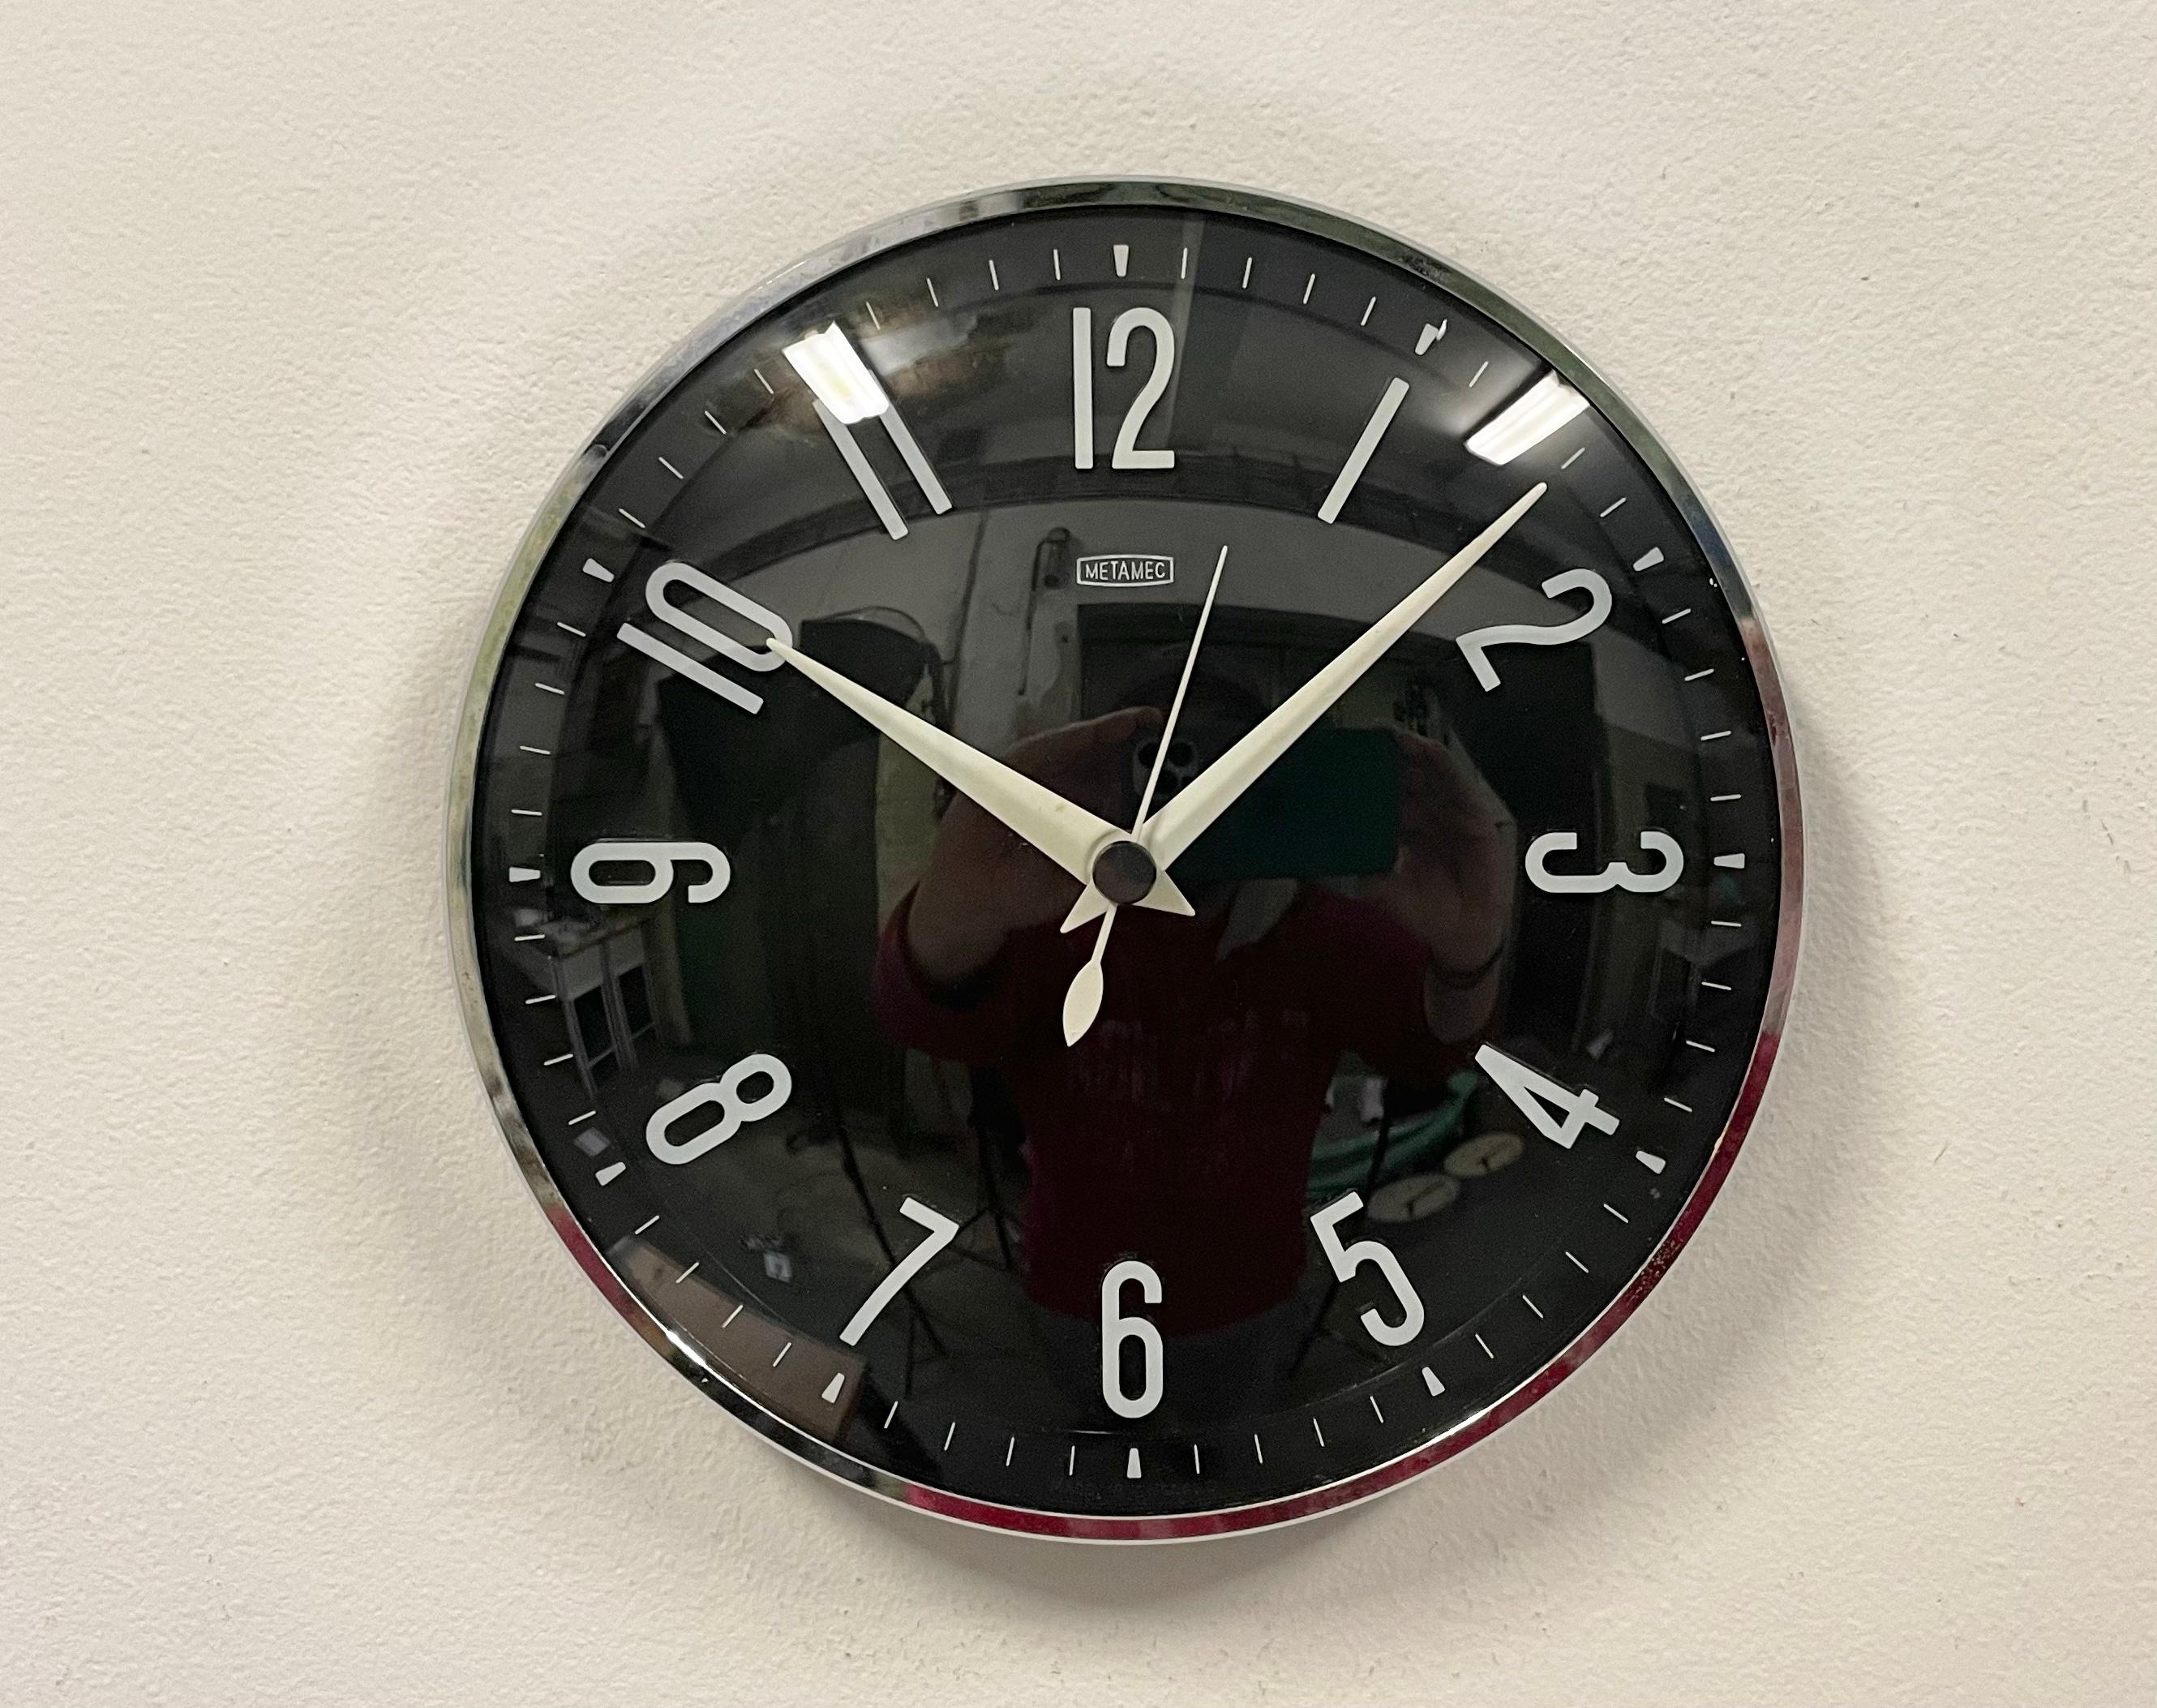 Wall clock produced by Metamec in England during the 1970s. It features a black bakelite clock face with white numerals, a white aluminium hands, chrome -plated frame and a curved clear glass cover. The piece has been converted into a